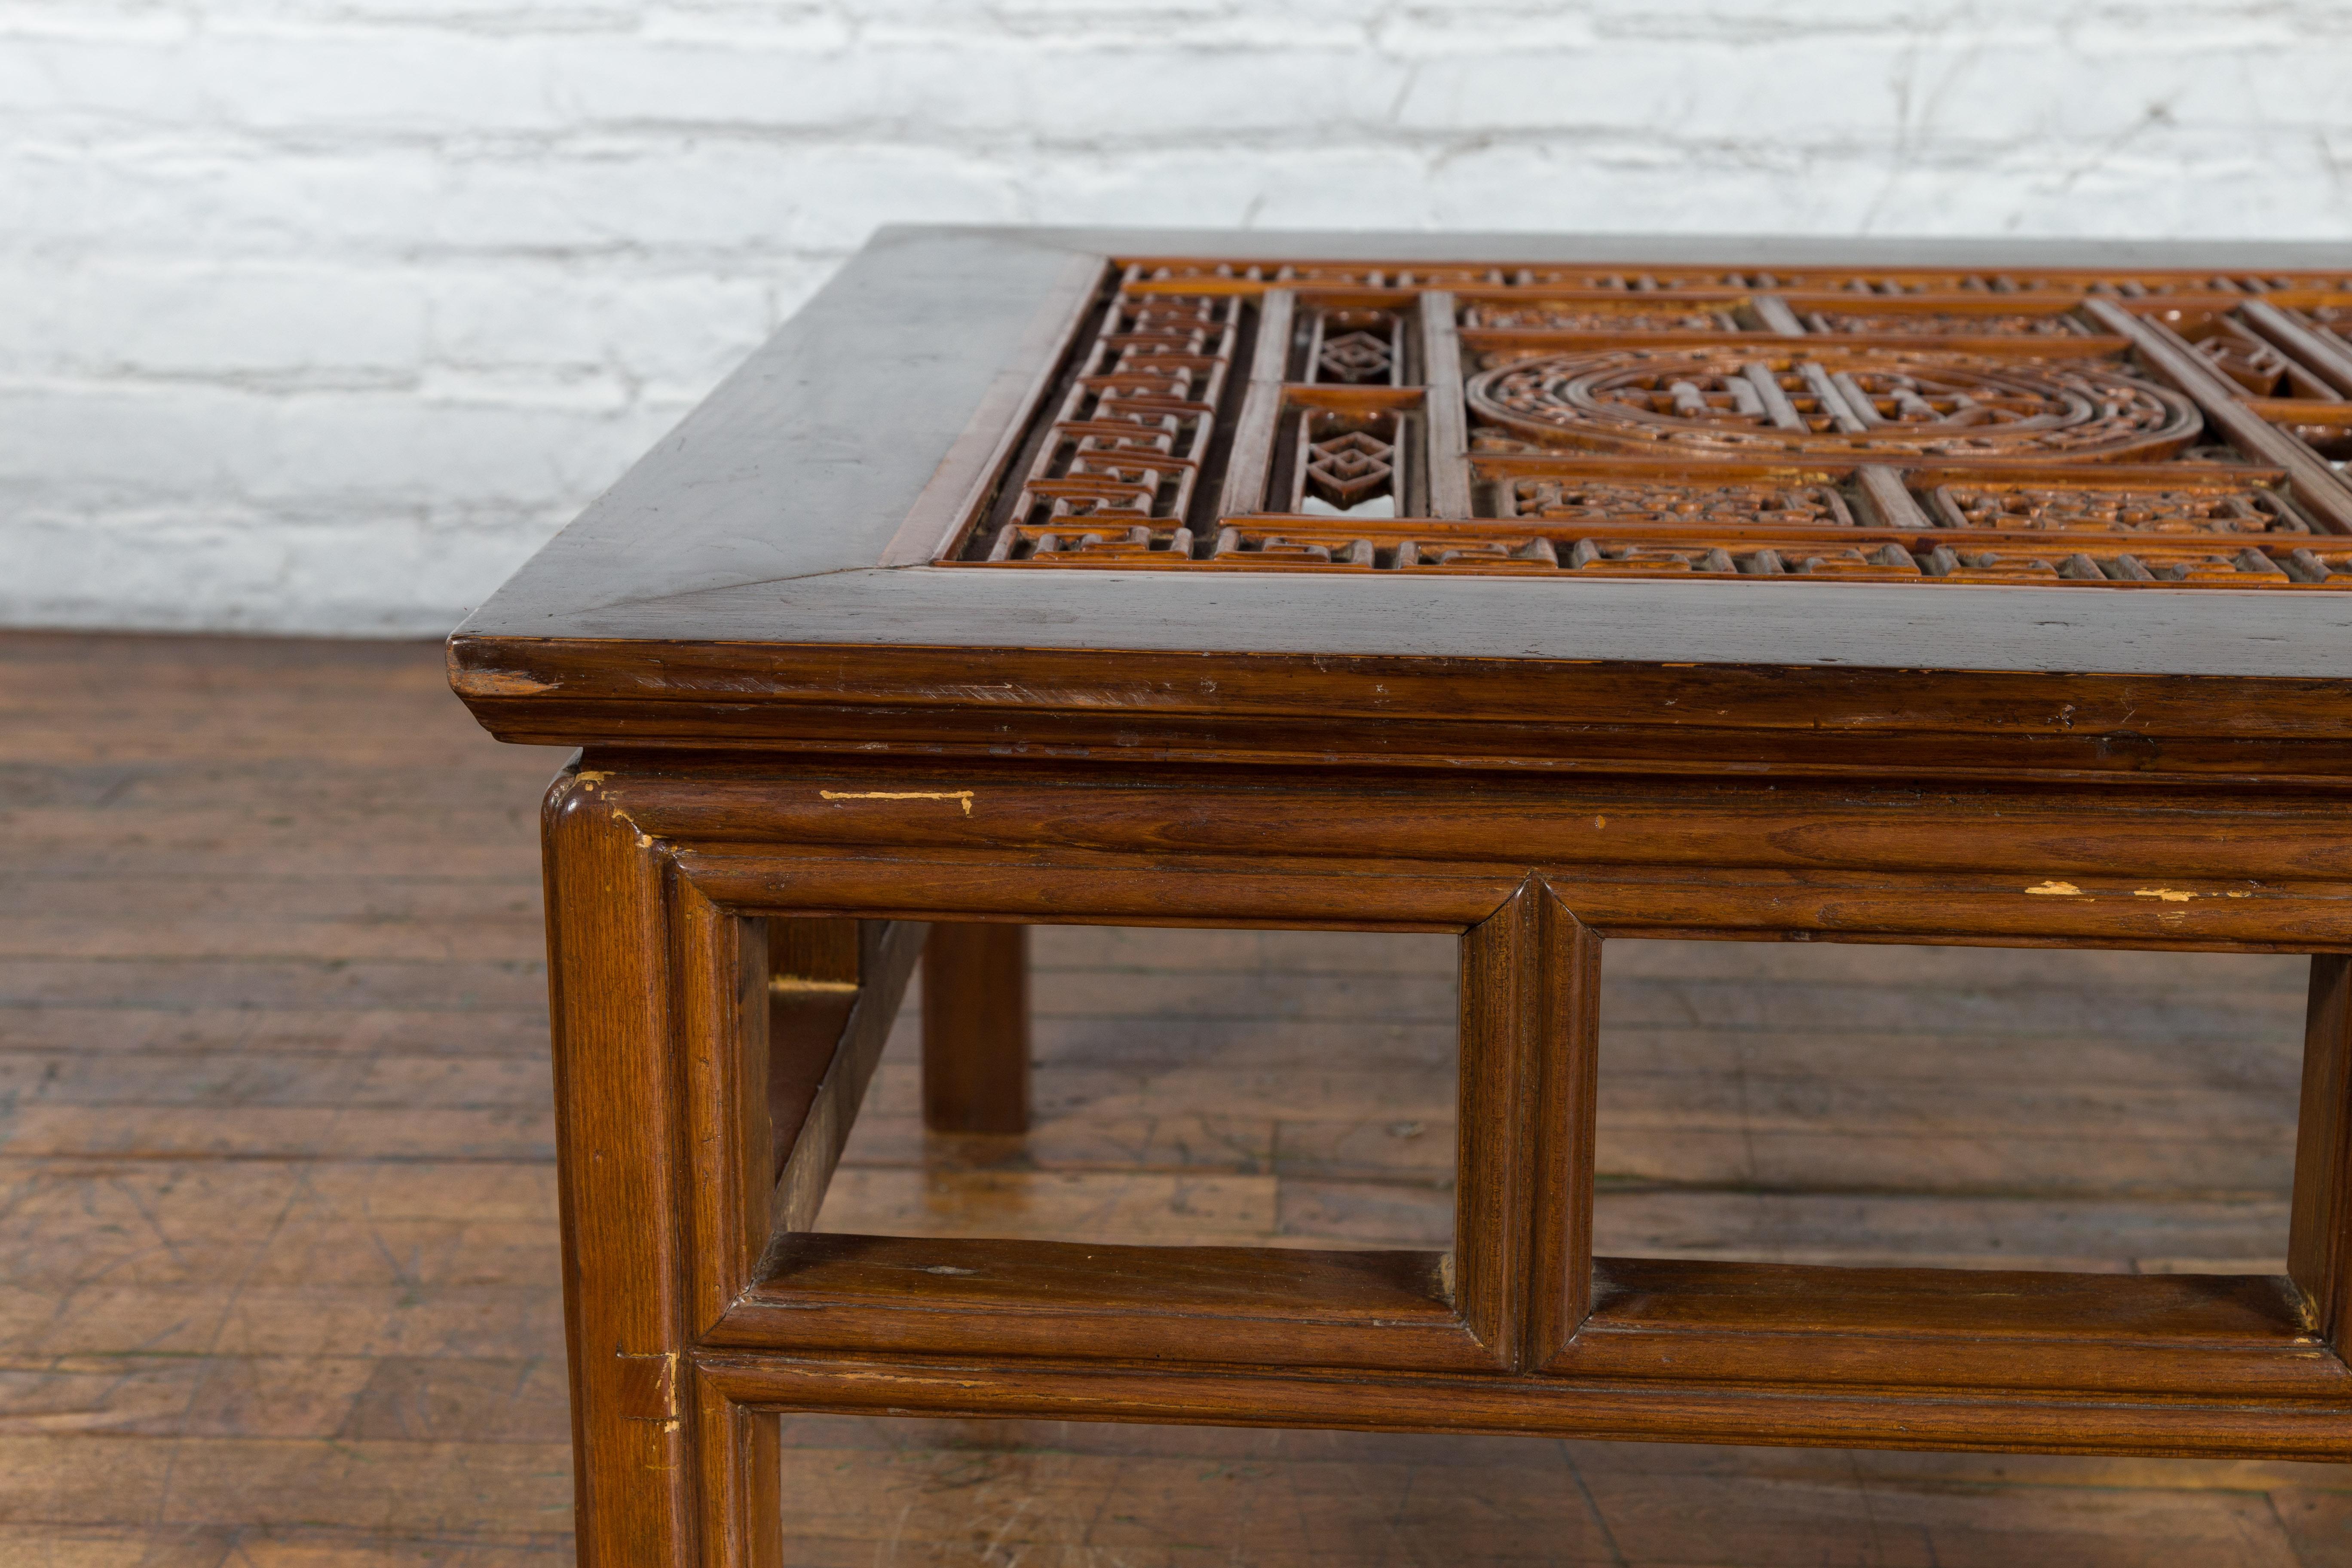 Wood Chinese Qing Dynasty Period 19th Century Coffee Table with Carved Fretwork Top For Sale